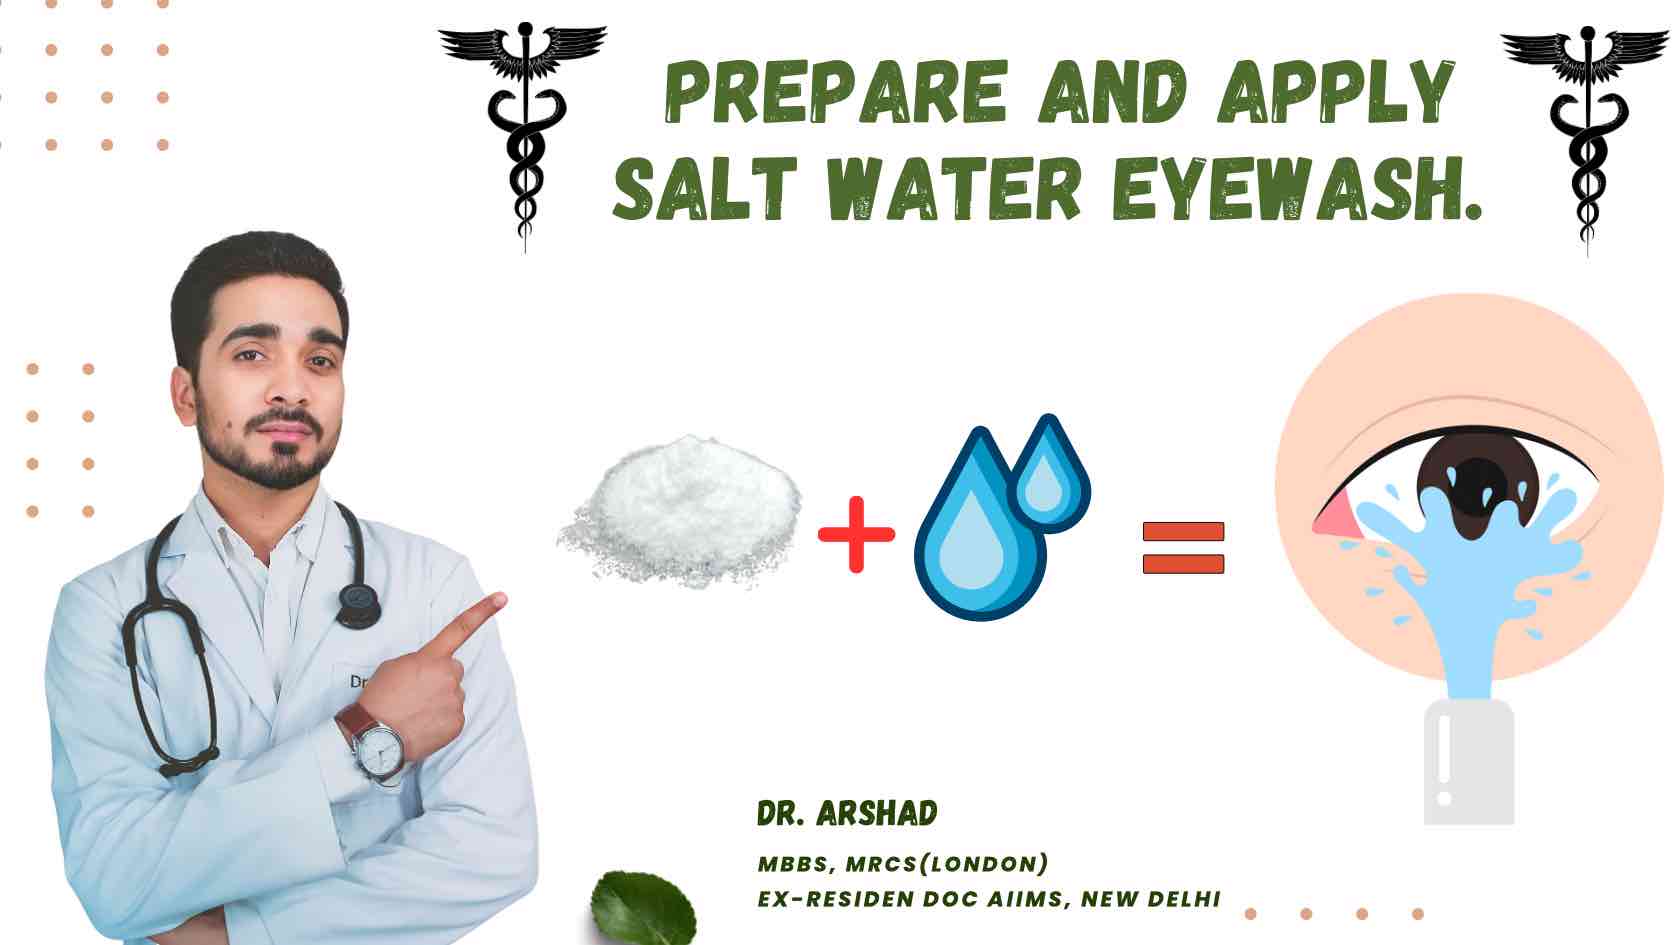 How To Prepare And Apply Salt Water Eyewash For Eye Infection